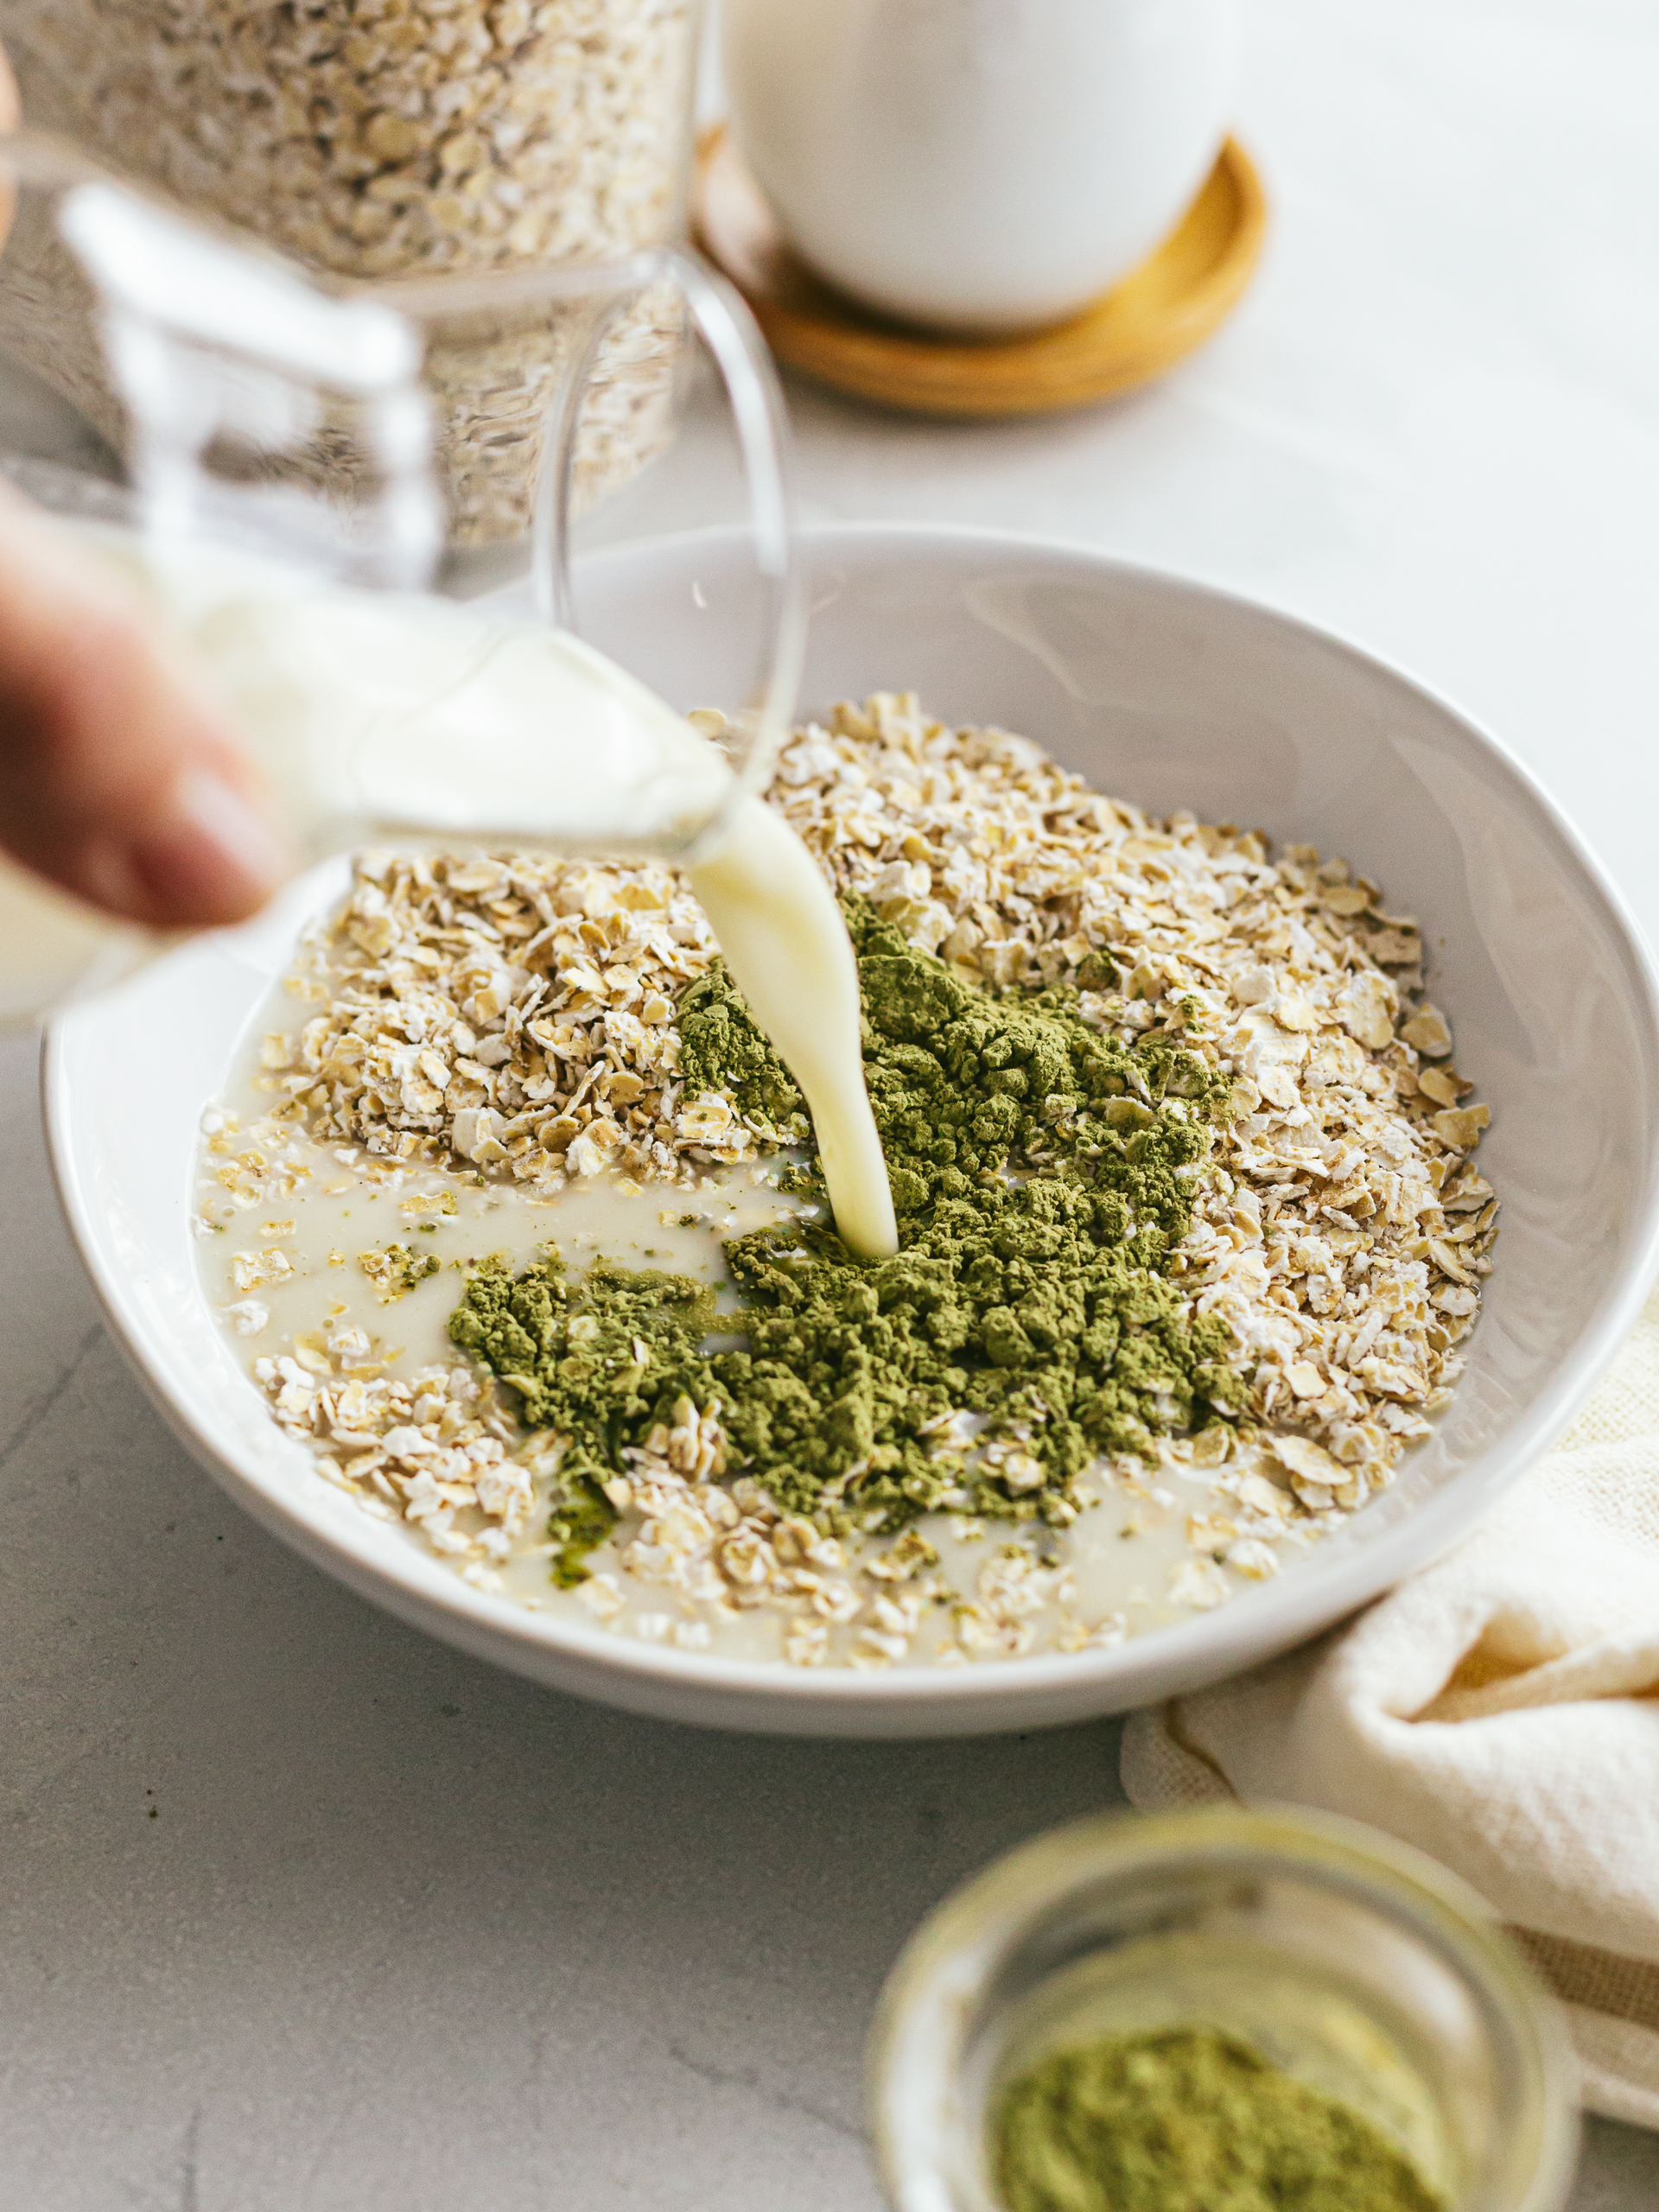 Pour milk into a bowl with oatmeal and matcha powder